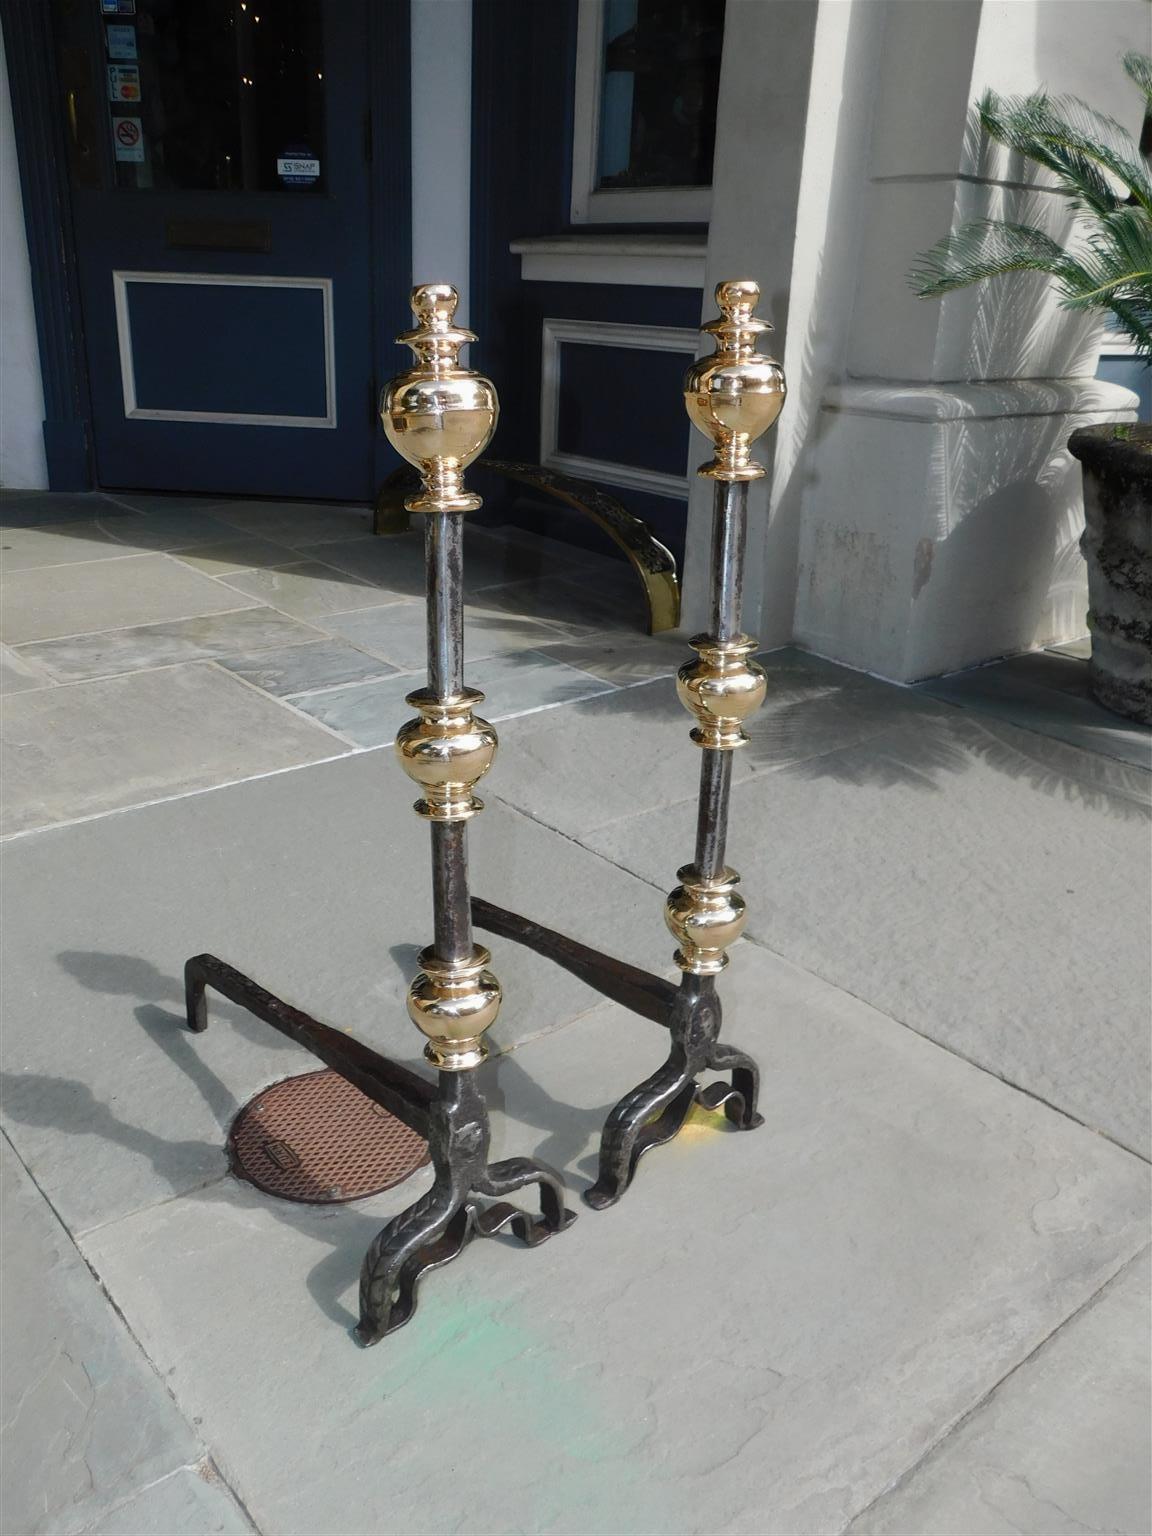 Pair of English brass and polished steel urn finial fire place andirons with decorative hand chase work, original wrought iron rear dog legs, and resting on scrolled legs with stylized penny feet, Late 18th century.